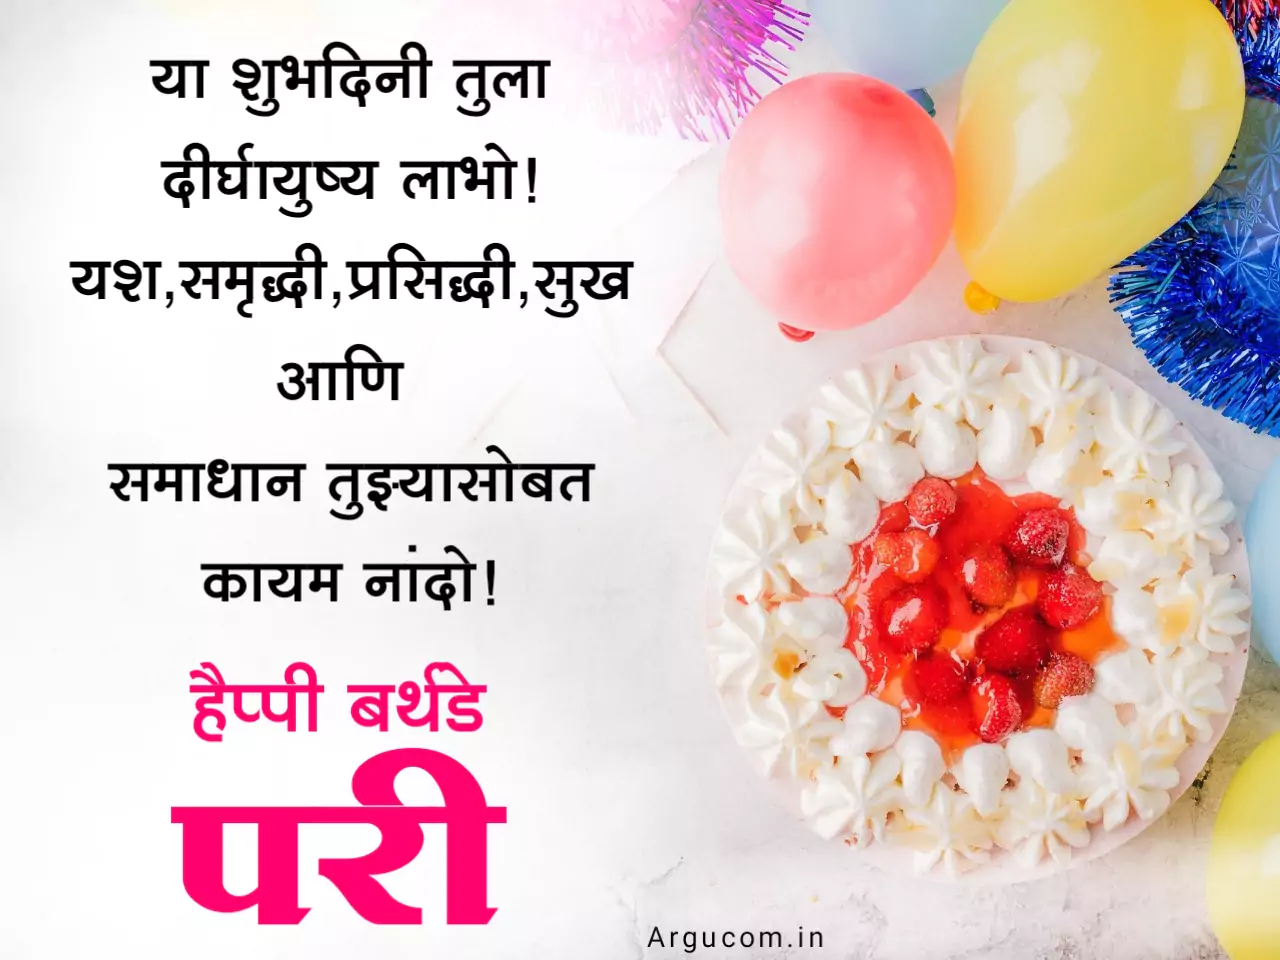 Happy birthday wishes for daughter in marathi